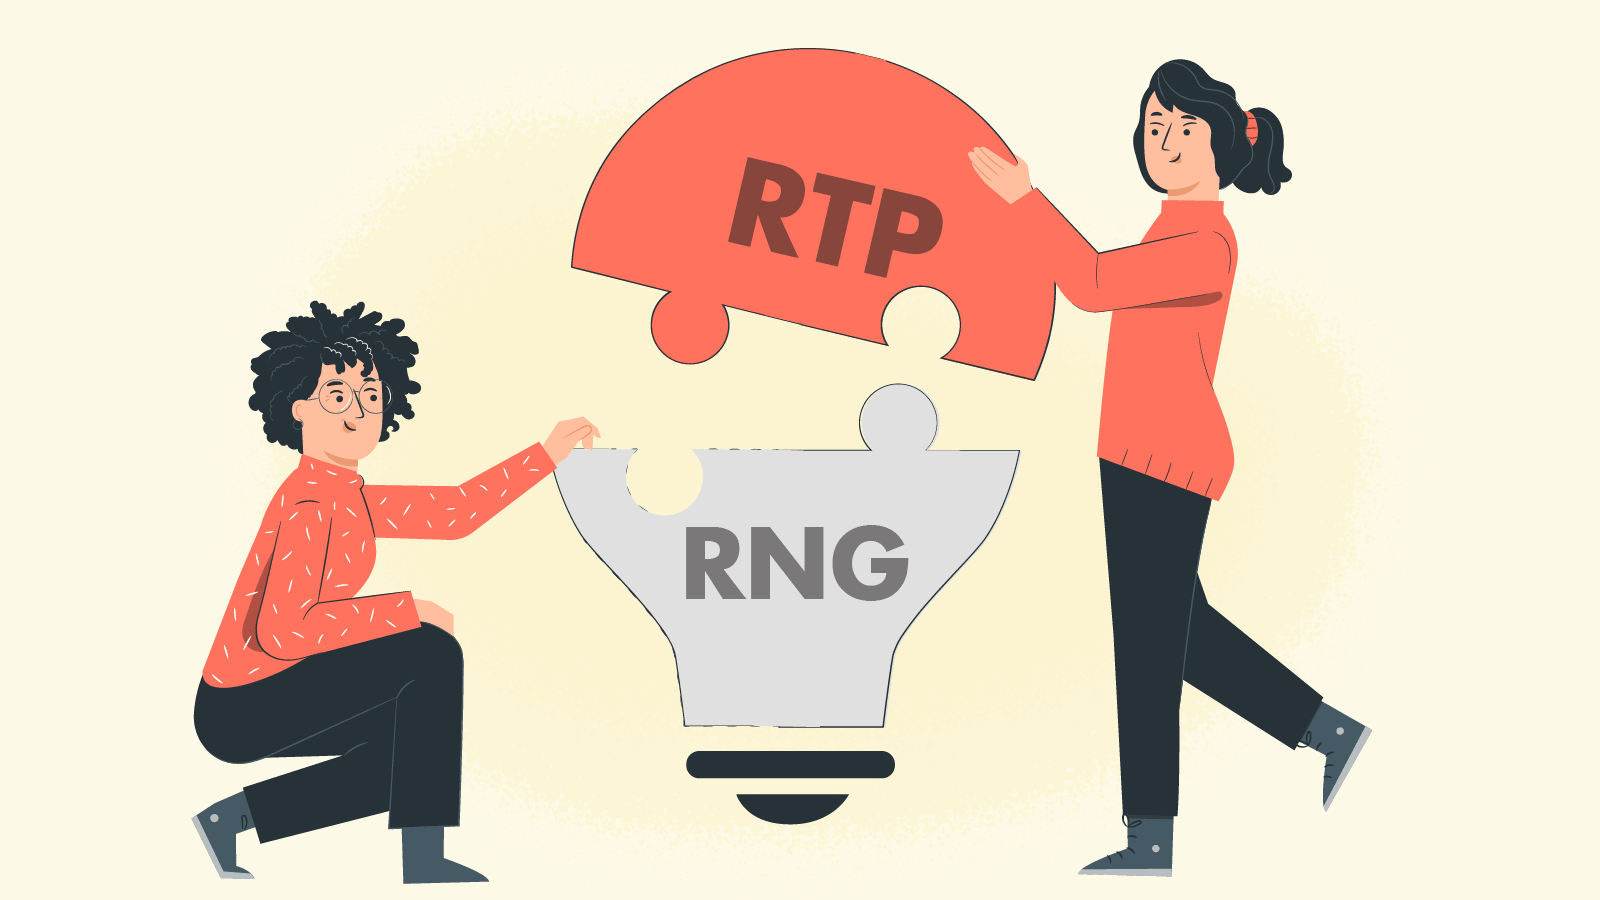 Is there any connection between RNG and RTP